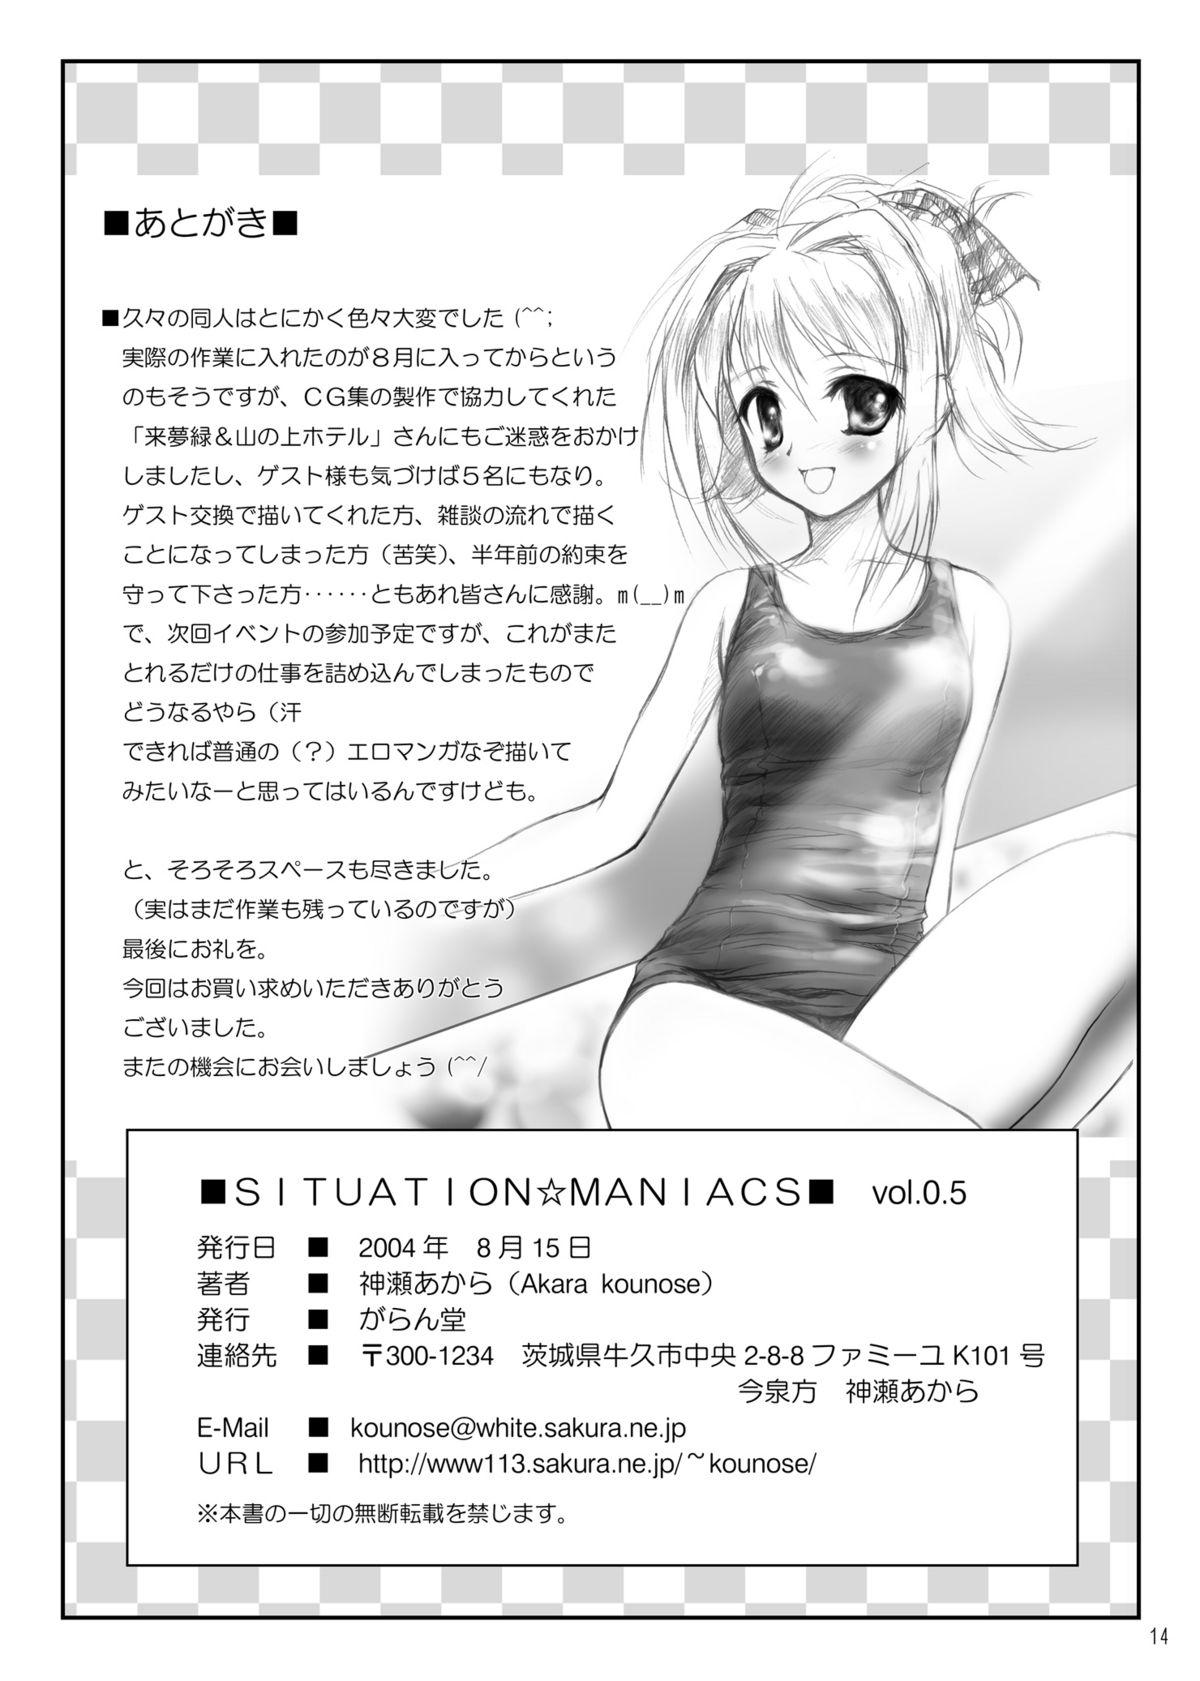 Asiansex Situation Maniacs vol.0.5 Omake Hon - Fate stay night Coroa - Page 7